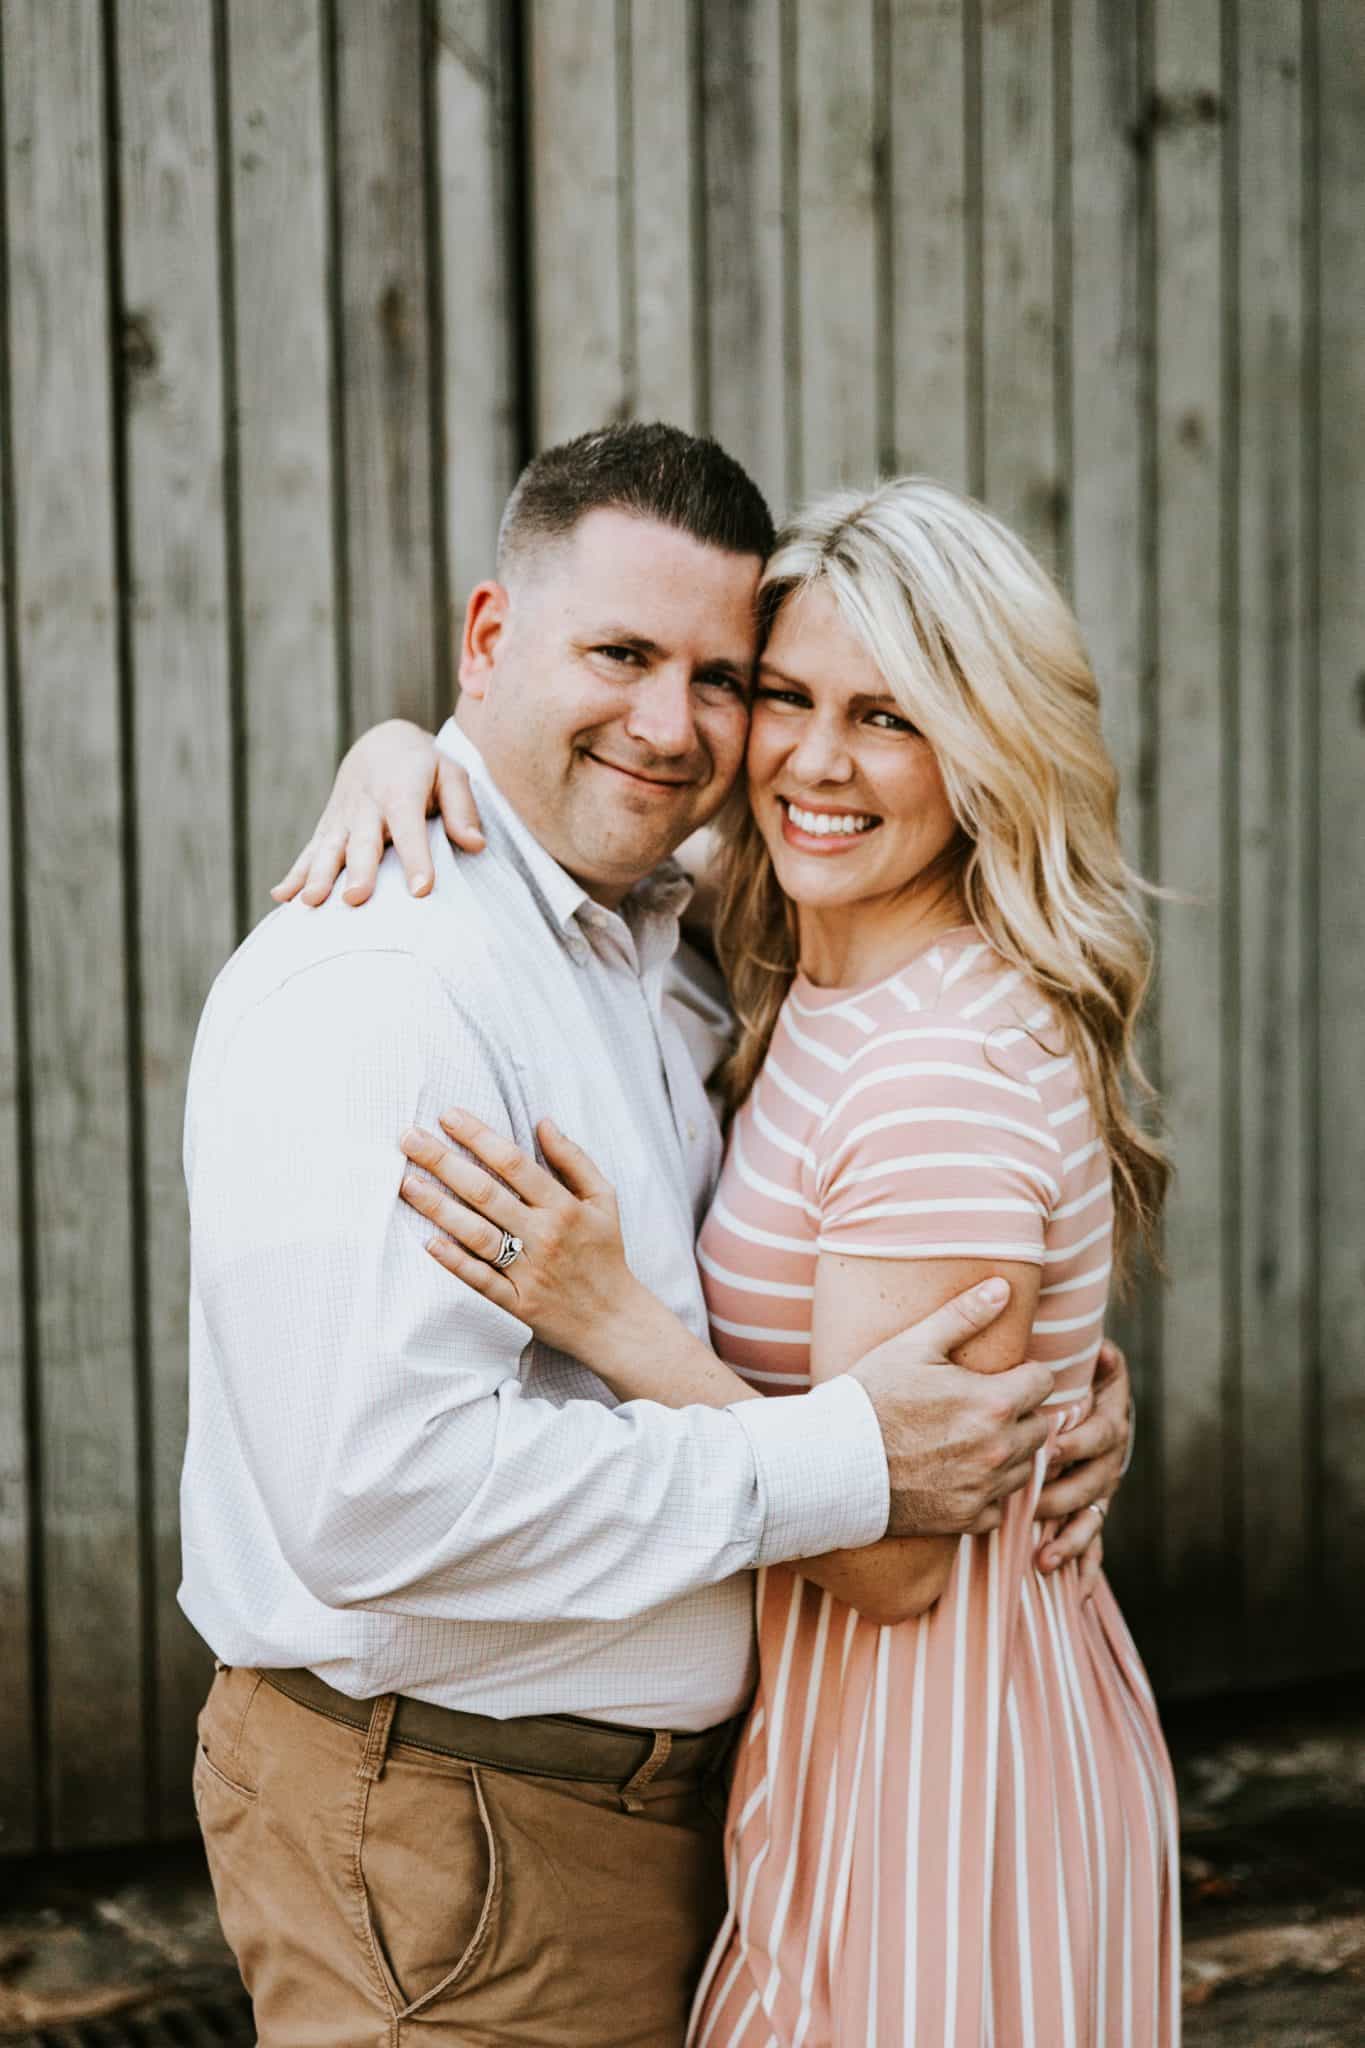 Wedding FAQs for Ryan and Brittany Worthen